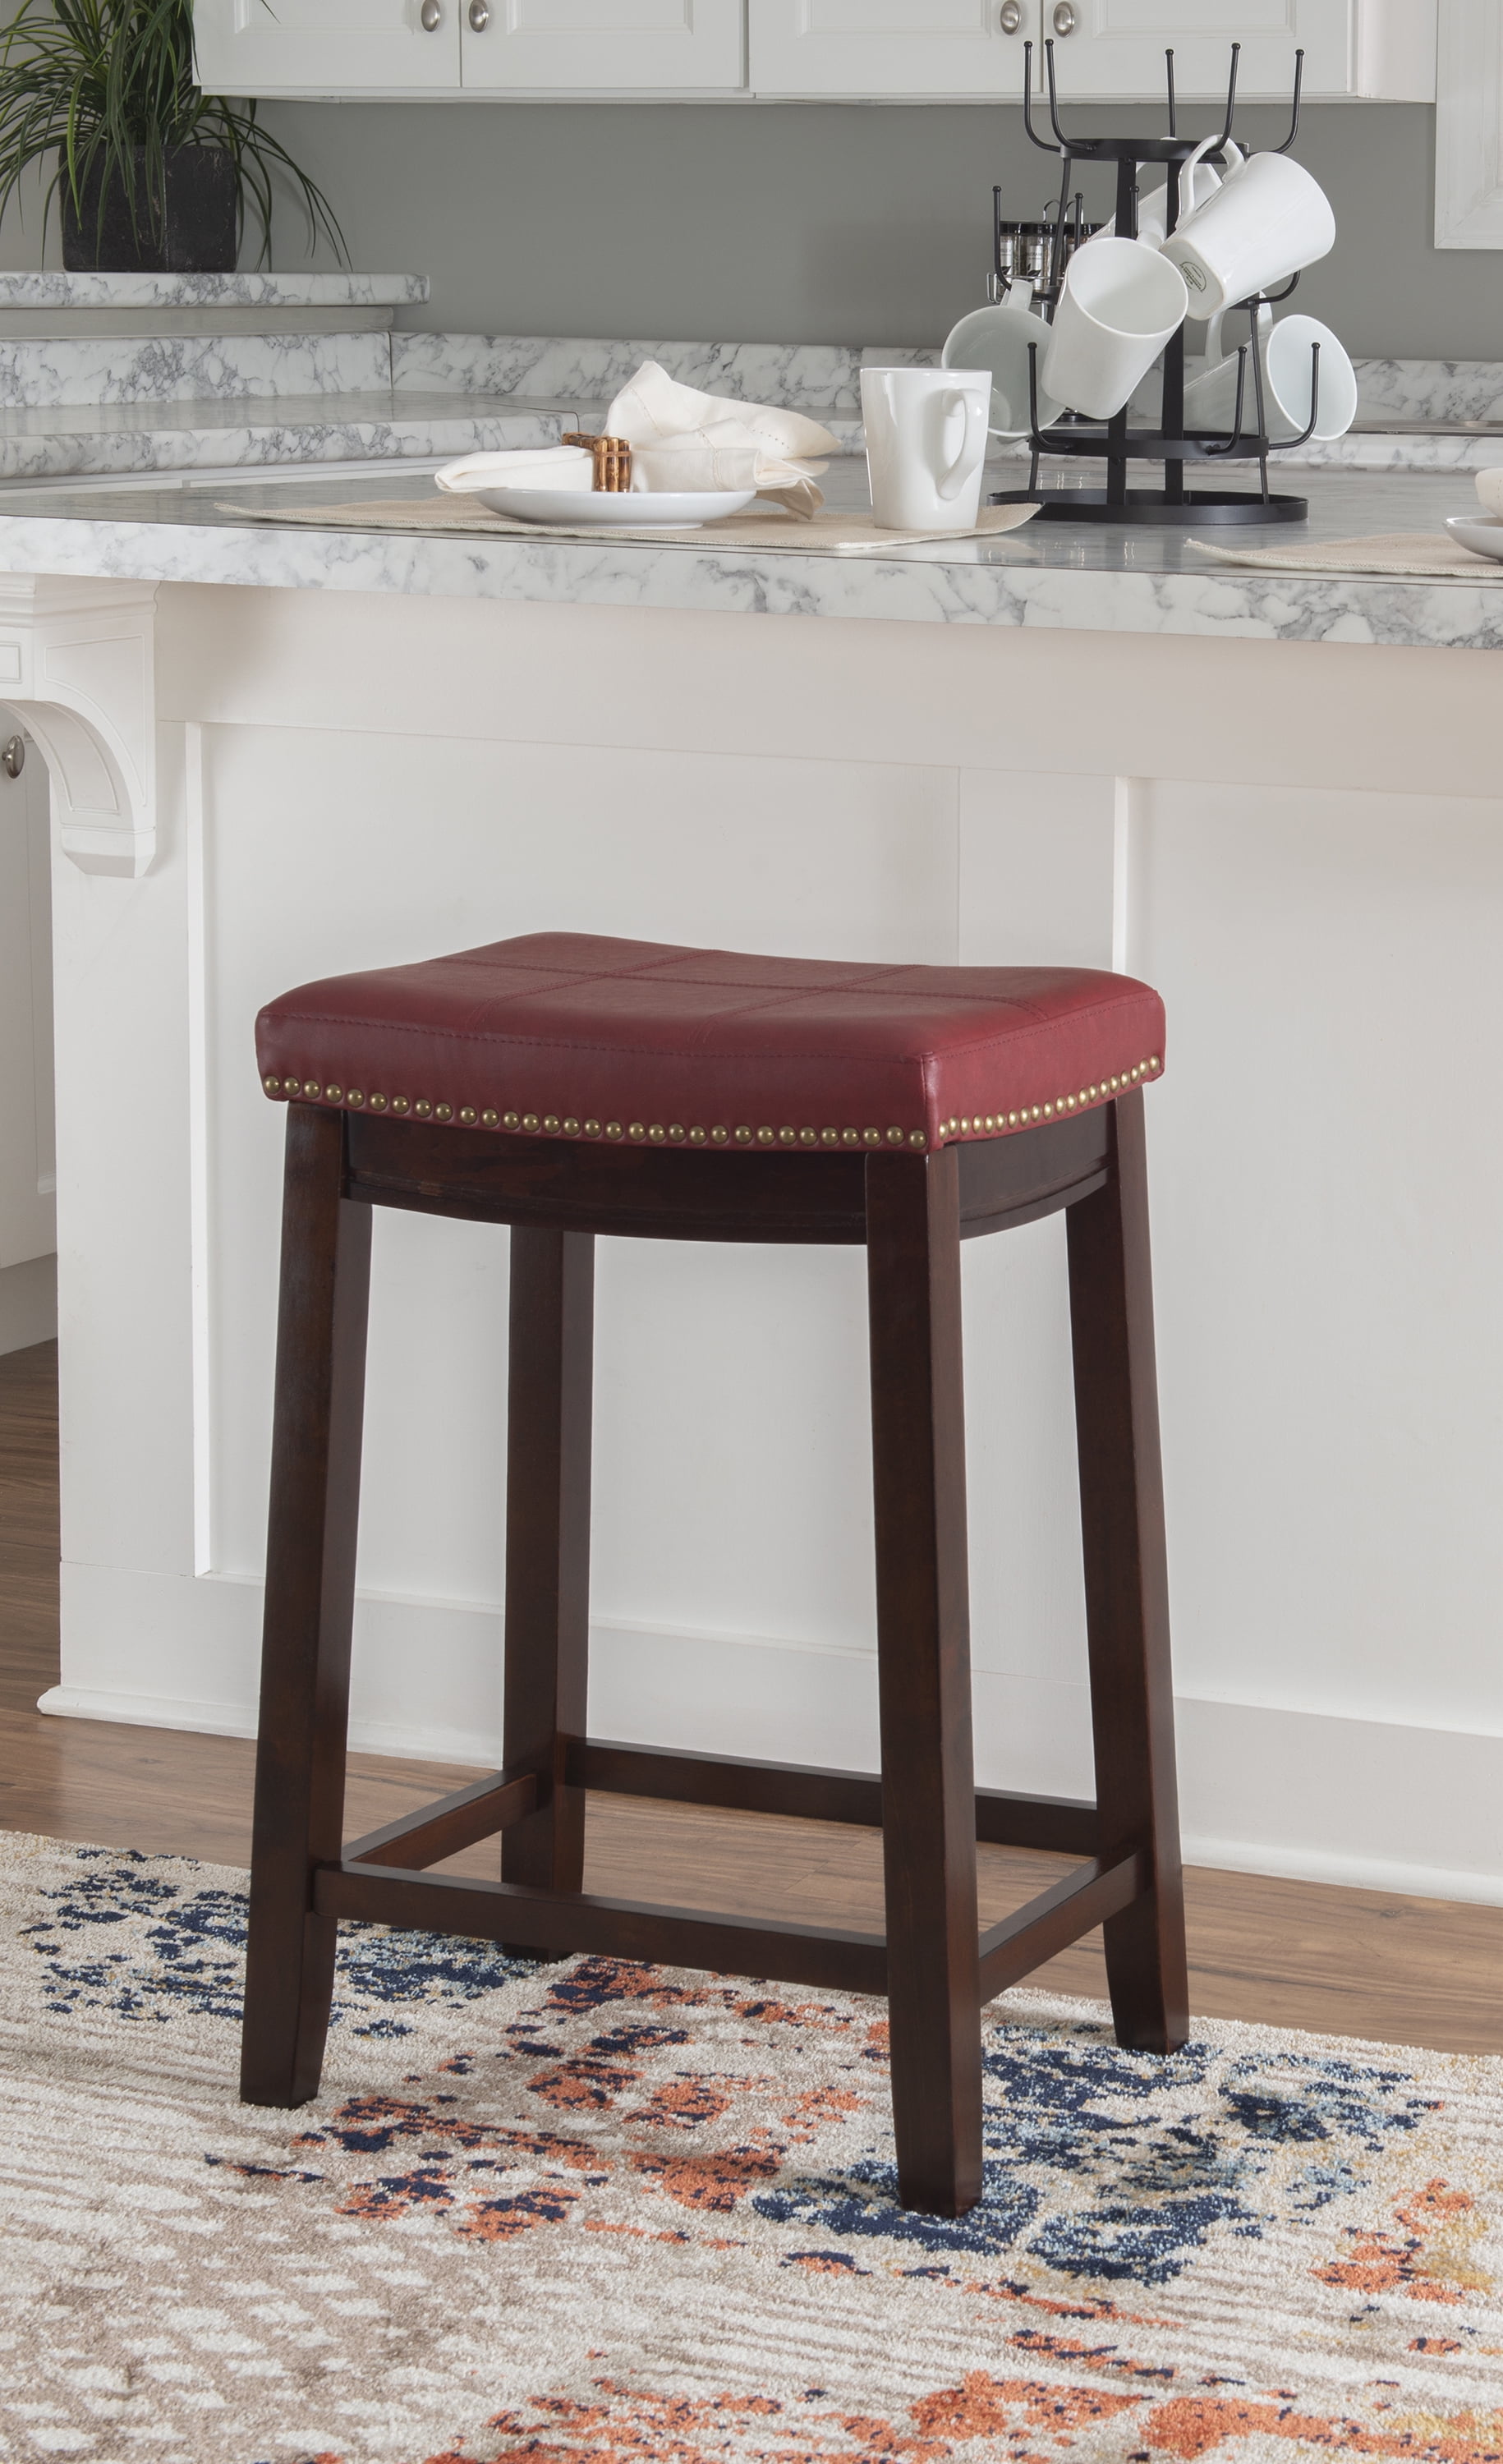 Linon Claridge 26 Backless Wood, Red Leather Counter Stools